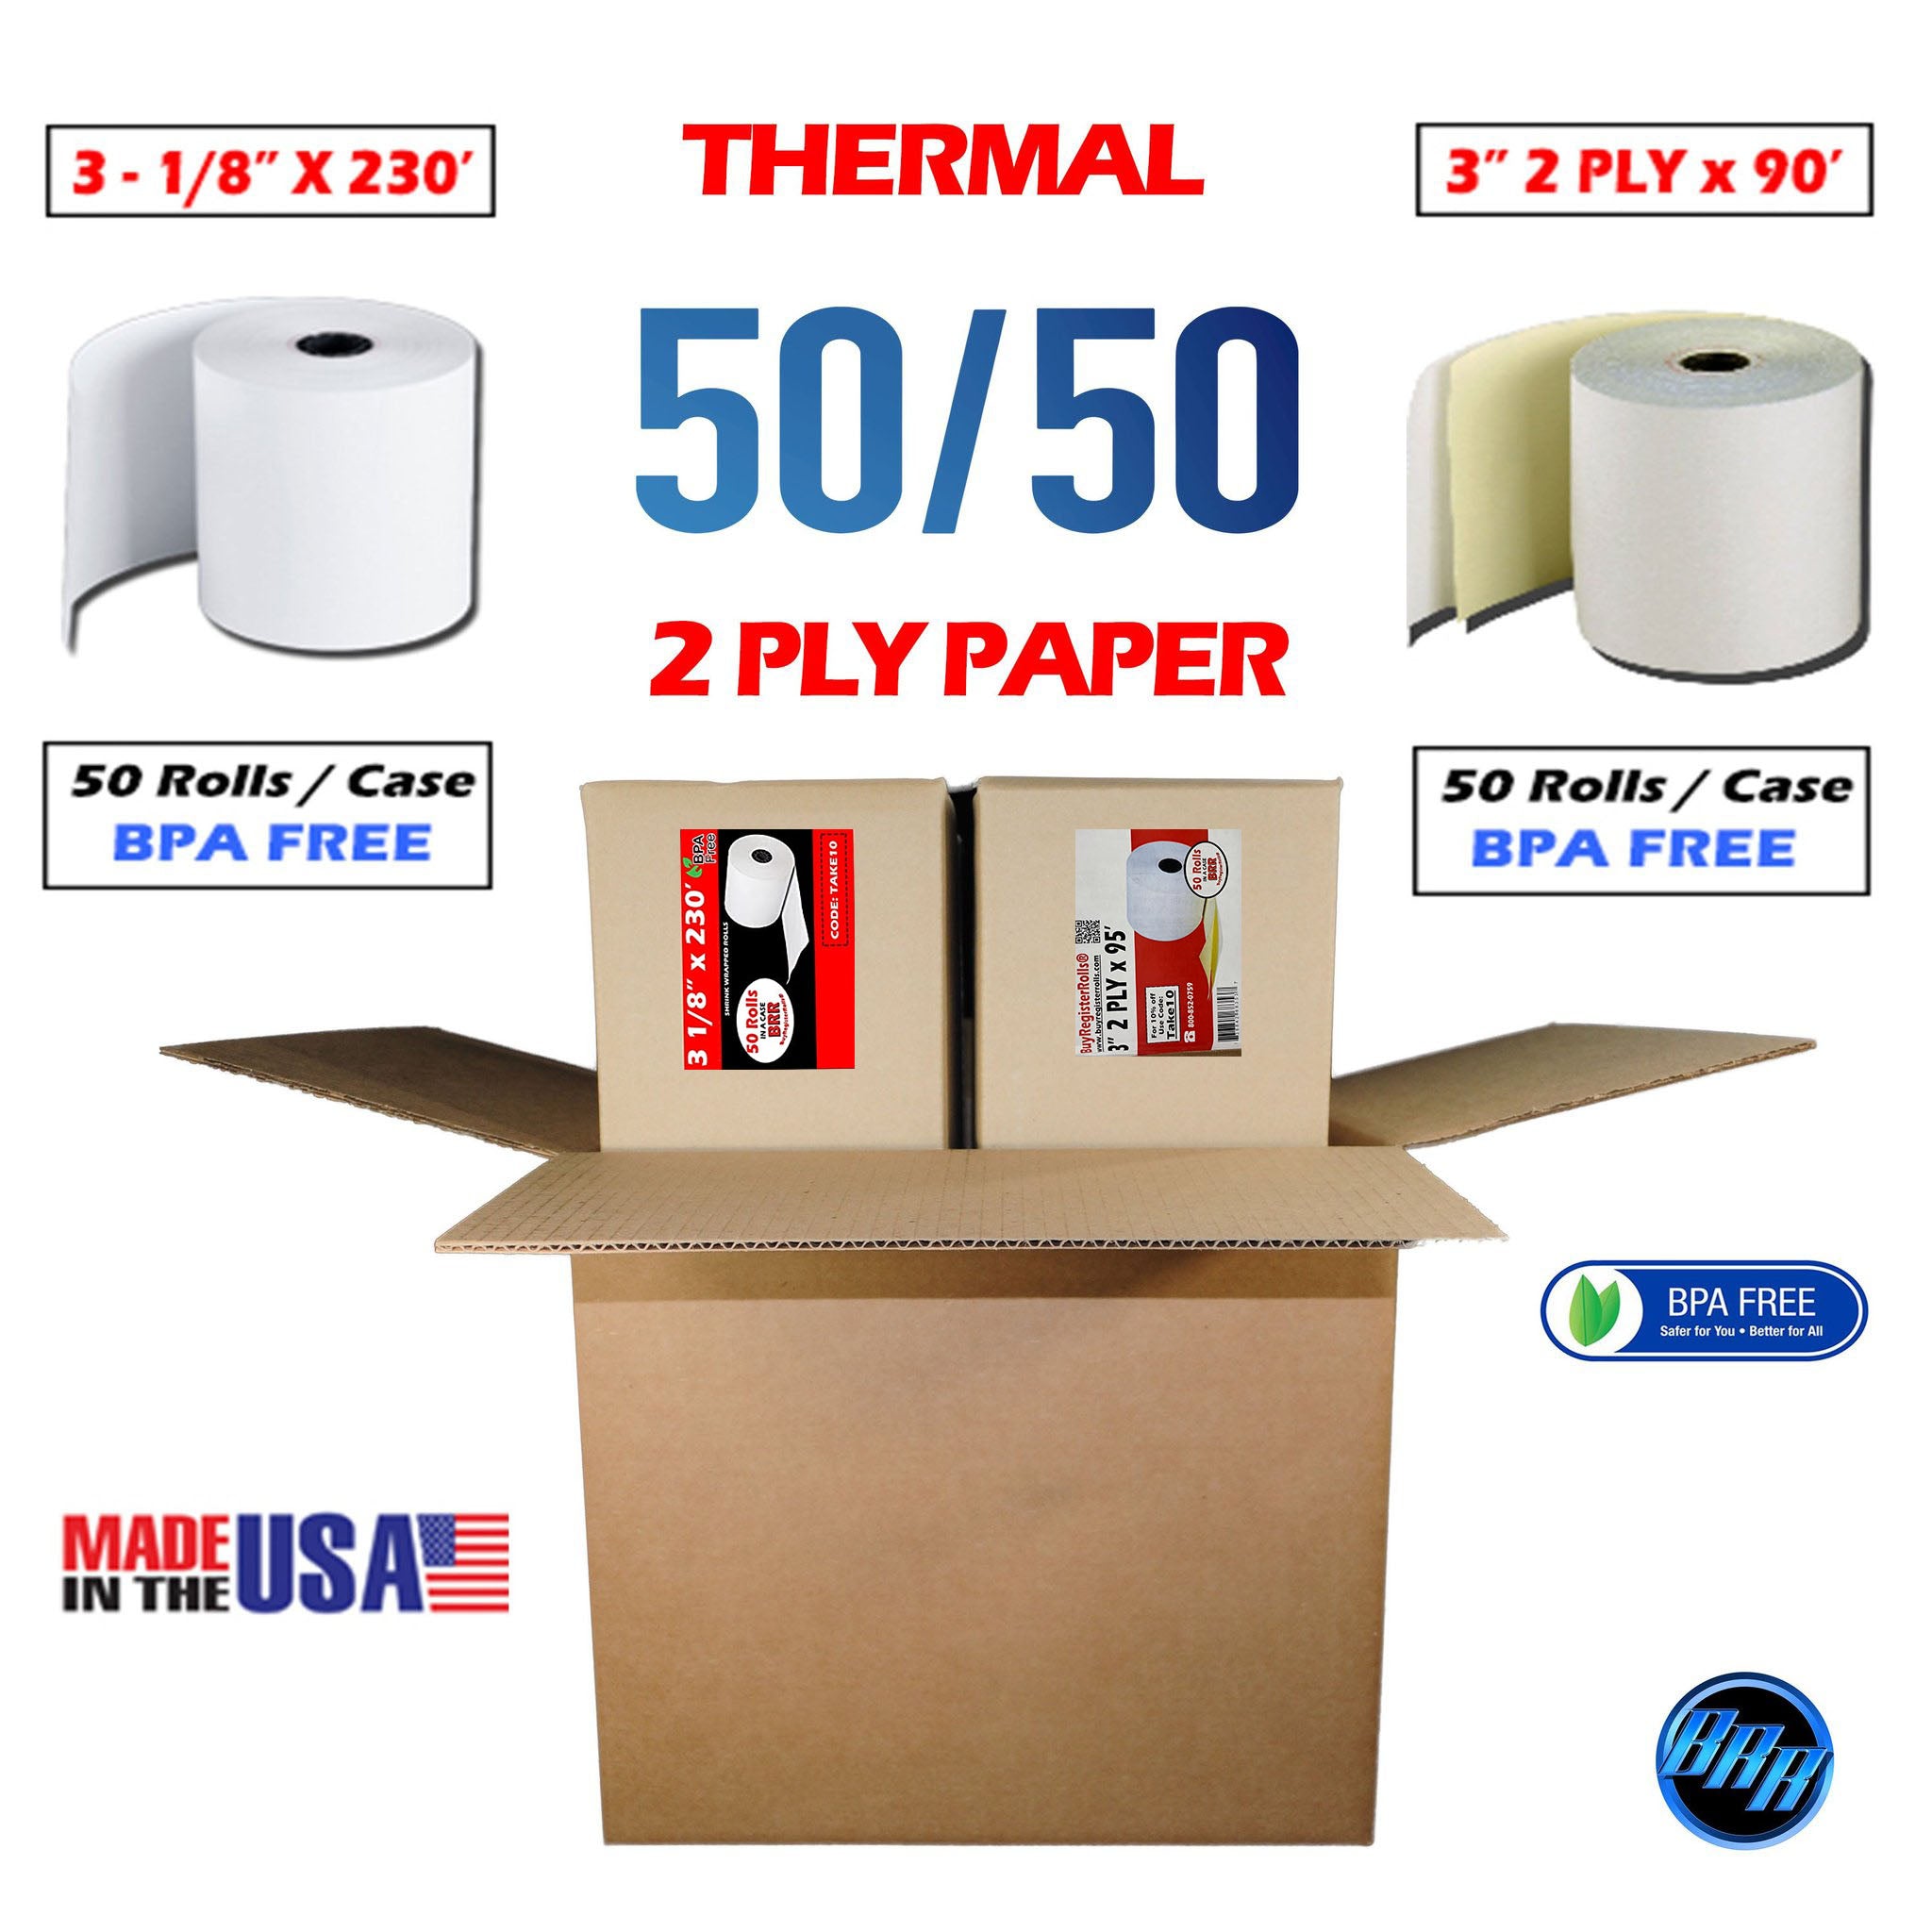 Thermal Paper vs. Carbonless Paper: Which One Should I Choose?